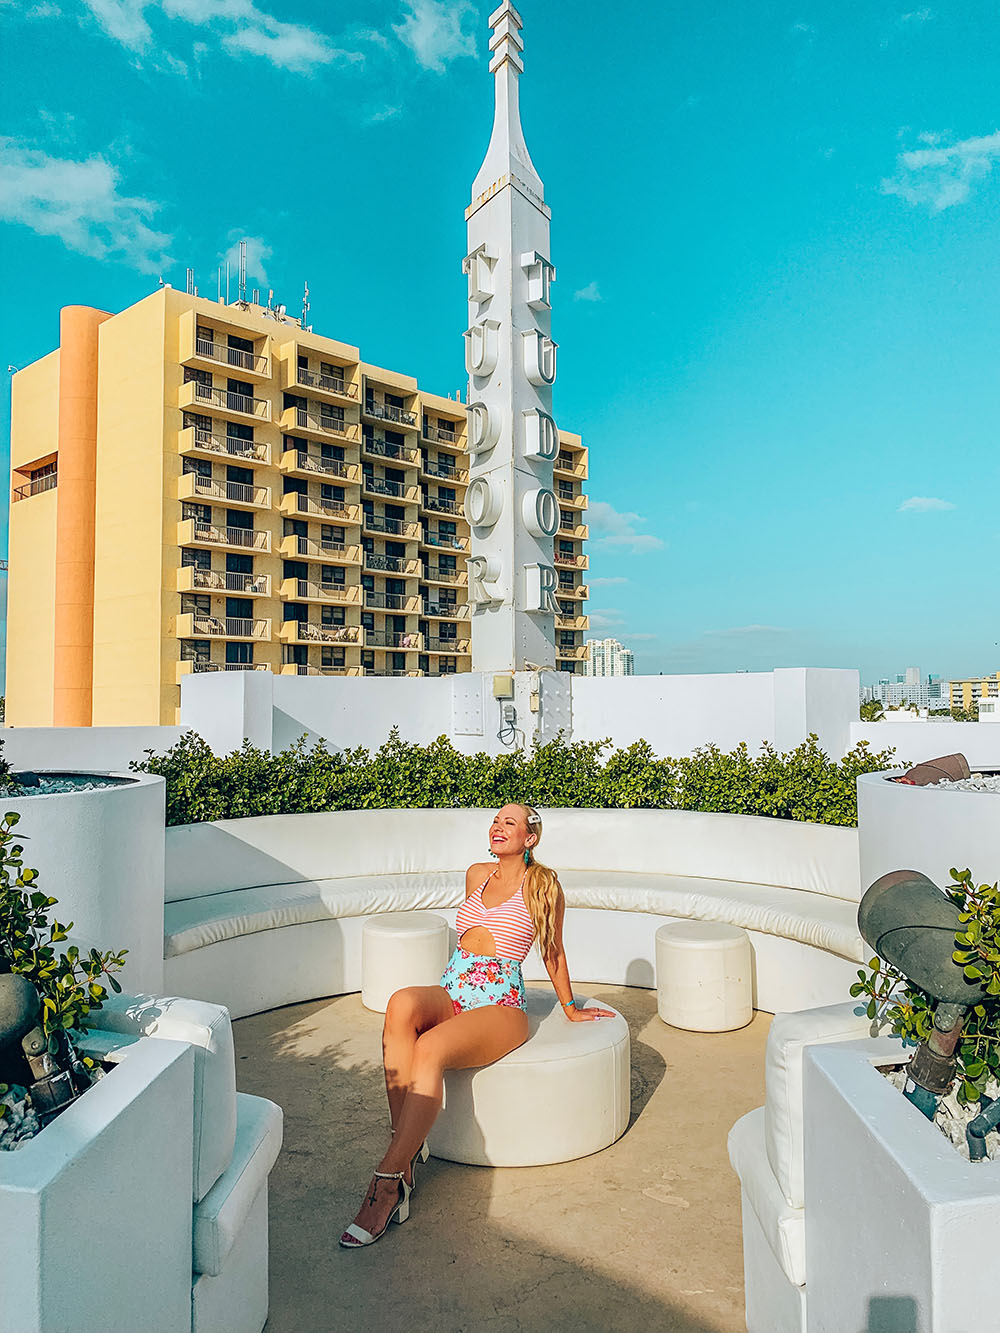 So you've planned a wonderful 3 day trip to Miami and now you're looking for the perfect itinerary for your visit… well, this guide is for you! I’ve put together the ultimate 3 days in Miami itinerary that will have you seeing and experiencing all of Miami’s top sights and attractions. From South Beach & Ocean Drive to Little Havana & Wynwood, you don’t want to miss this guide to the perfect long weekend in Miami. Pictured here: Staying at Dream South Beach